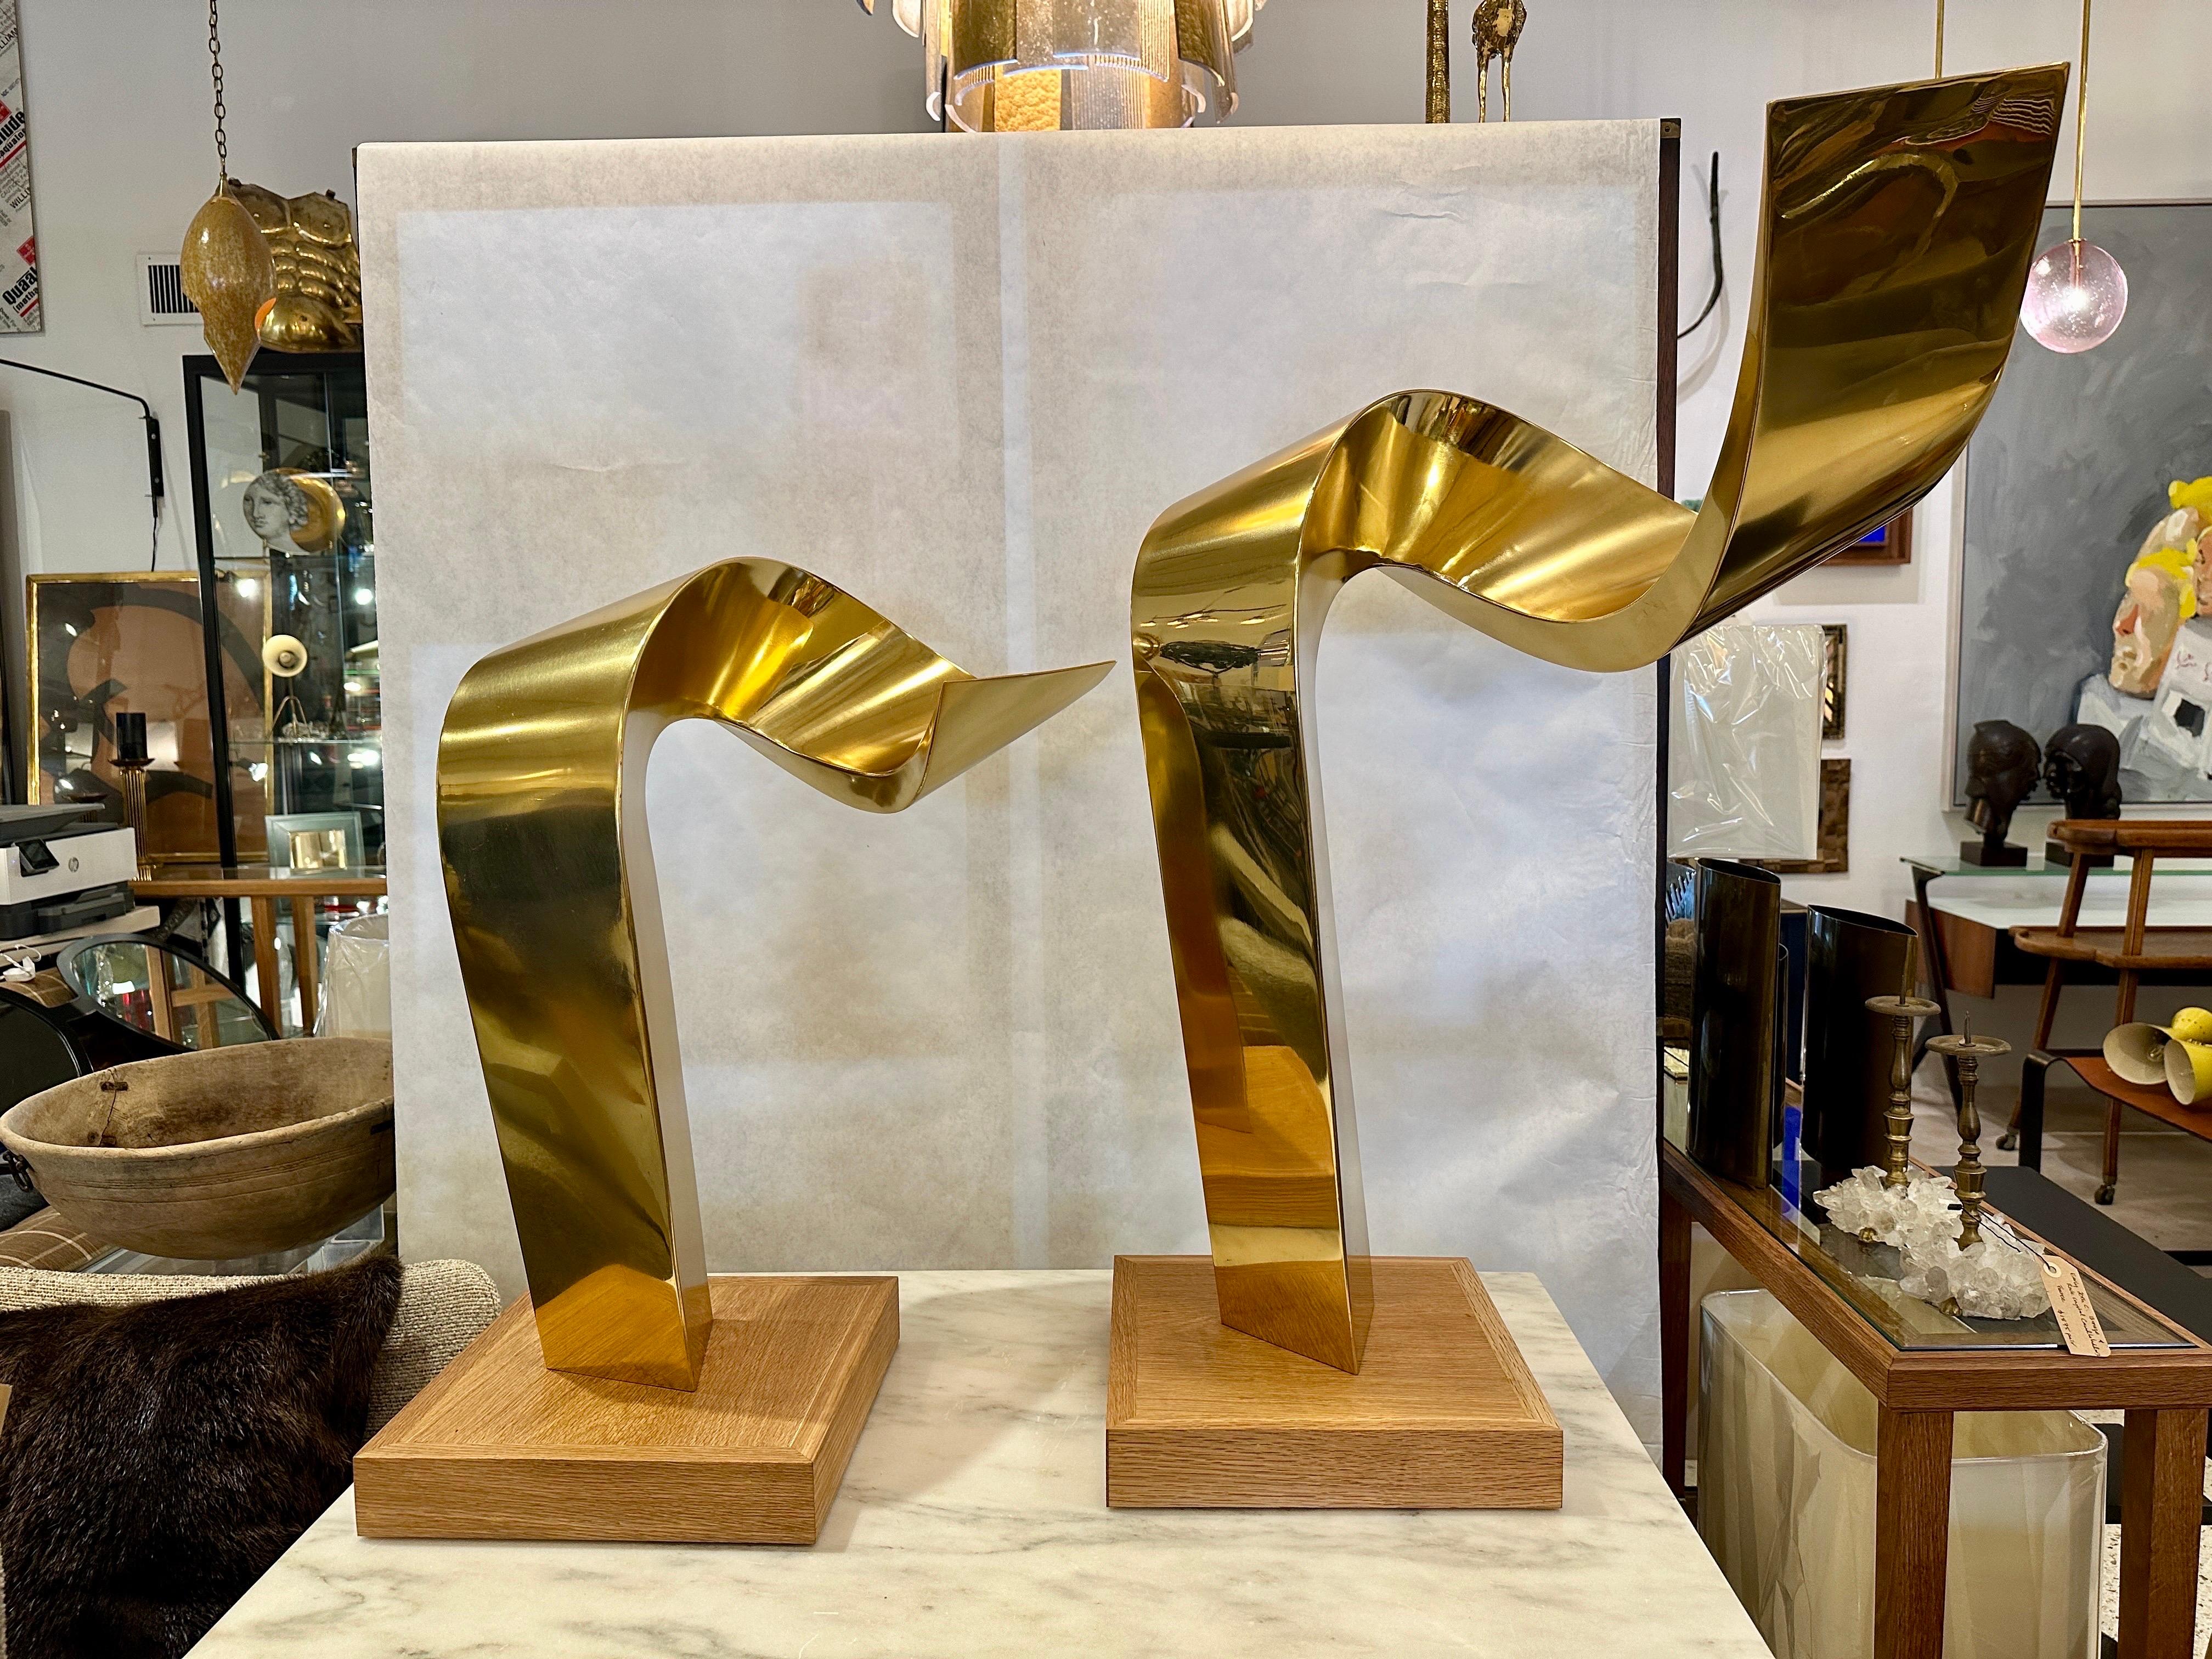 These wonderful tall free-standing abstract brass sculptures by Jean-Claude Hug, France (Born 1939), are being sold together.  HUG is known for metal work sculptures, these two curved brass pieces, can be displayed together or apart.  Signed 'J C